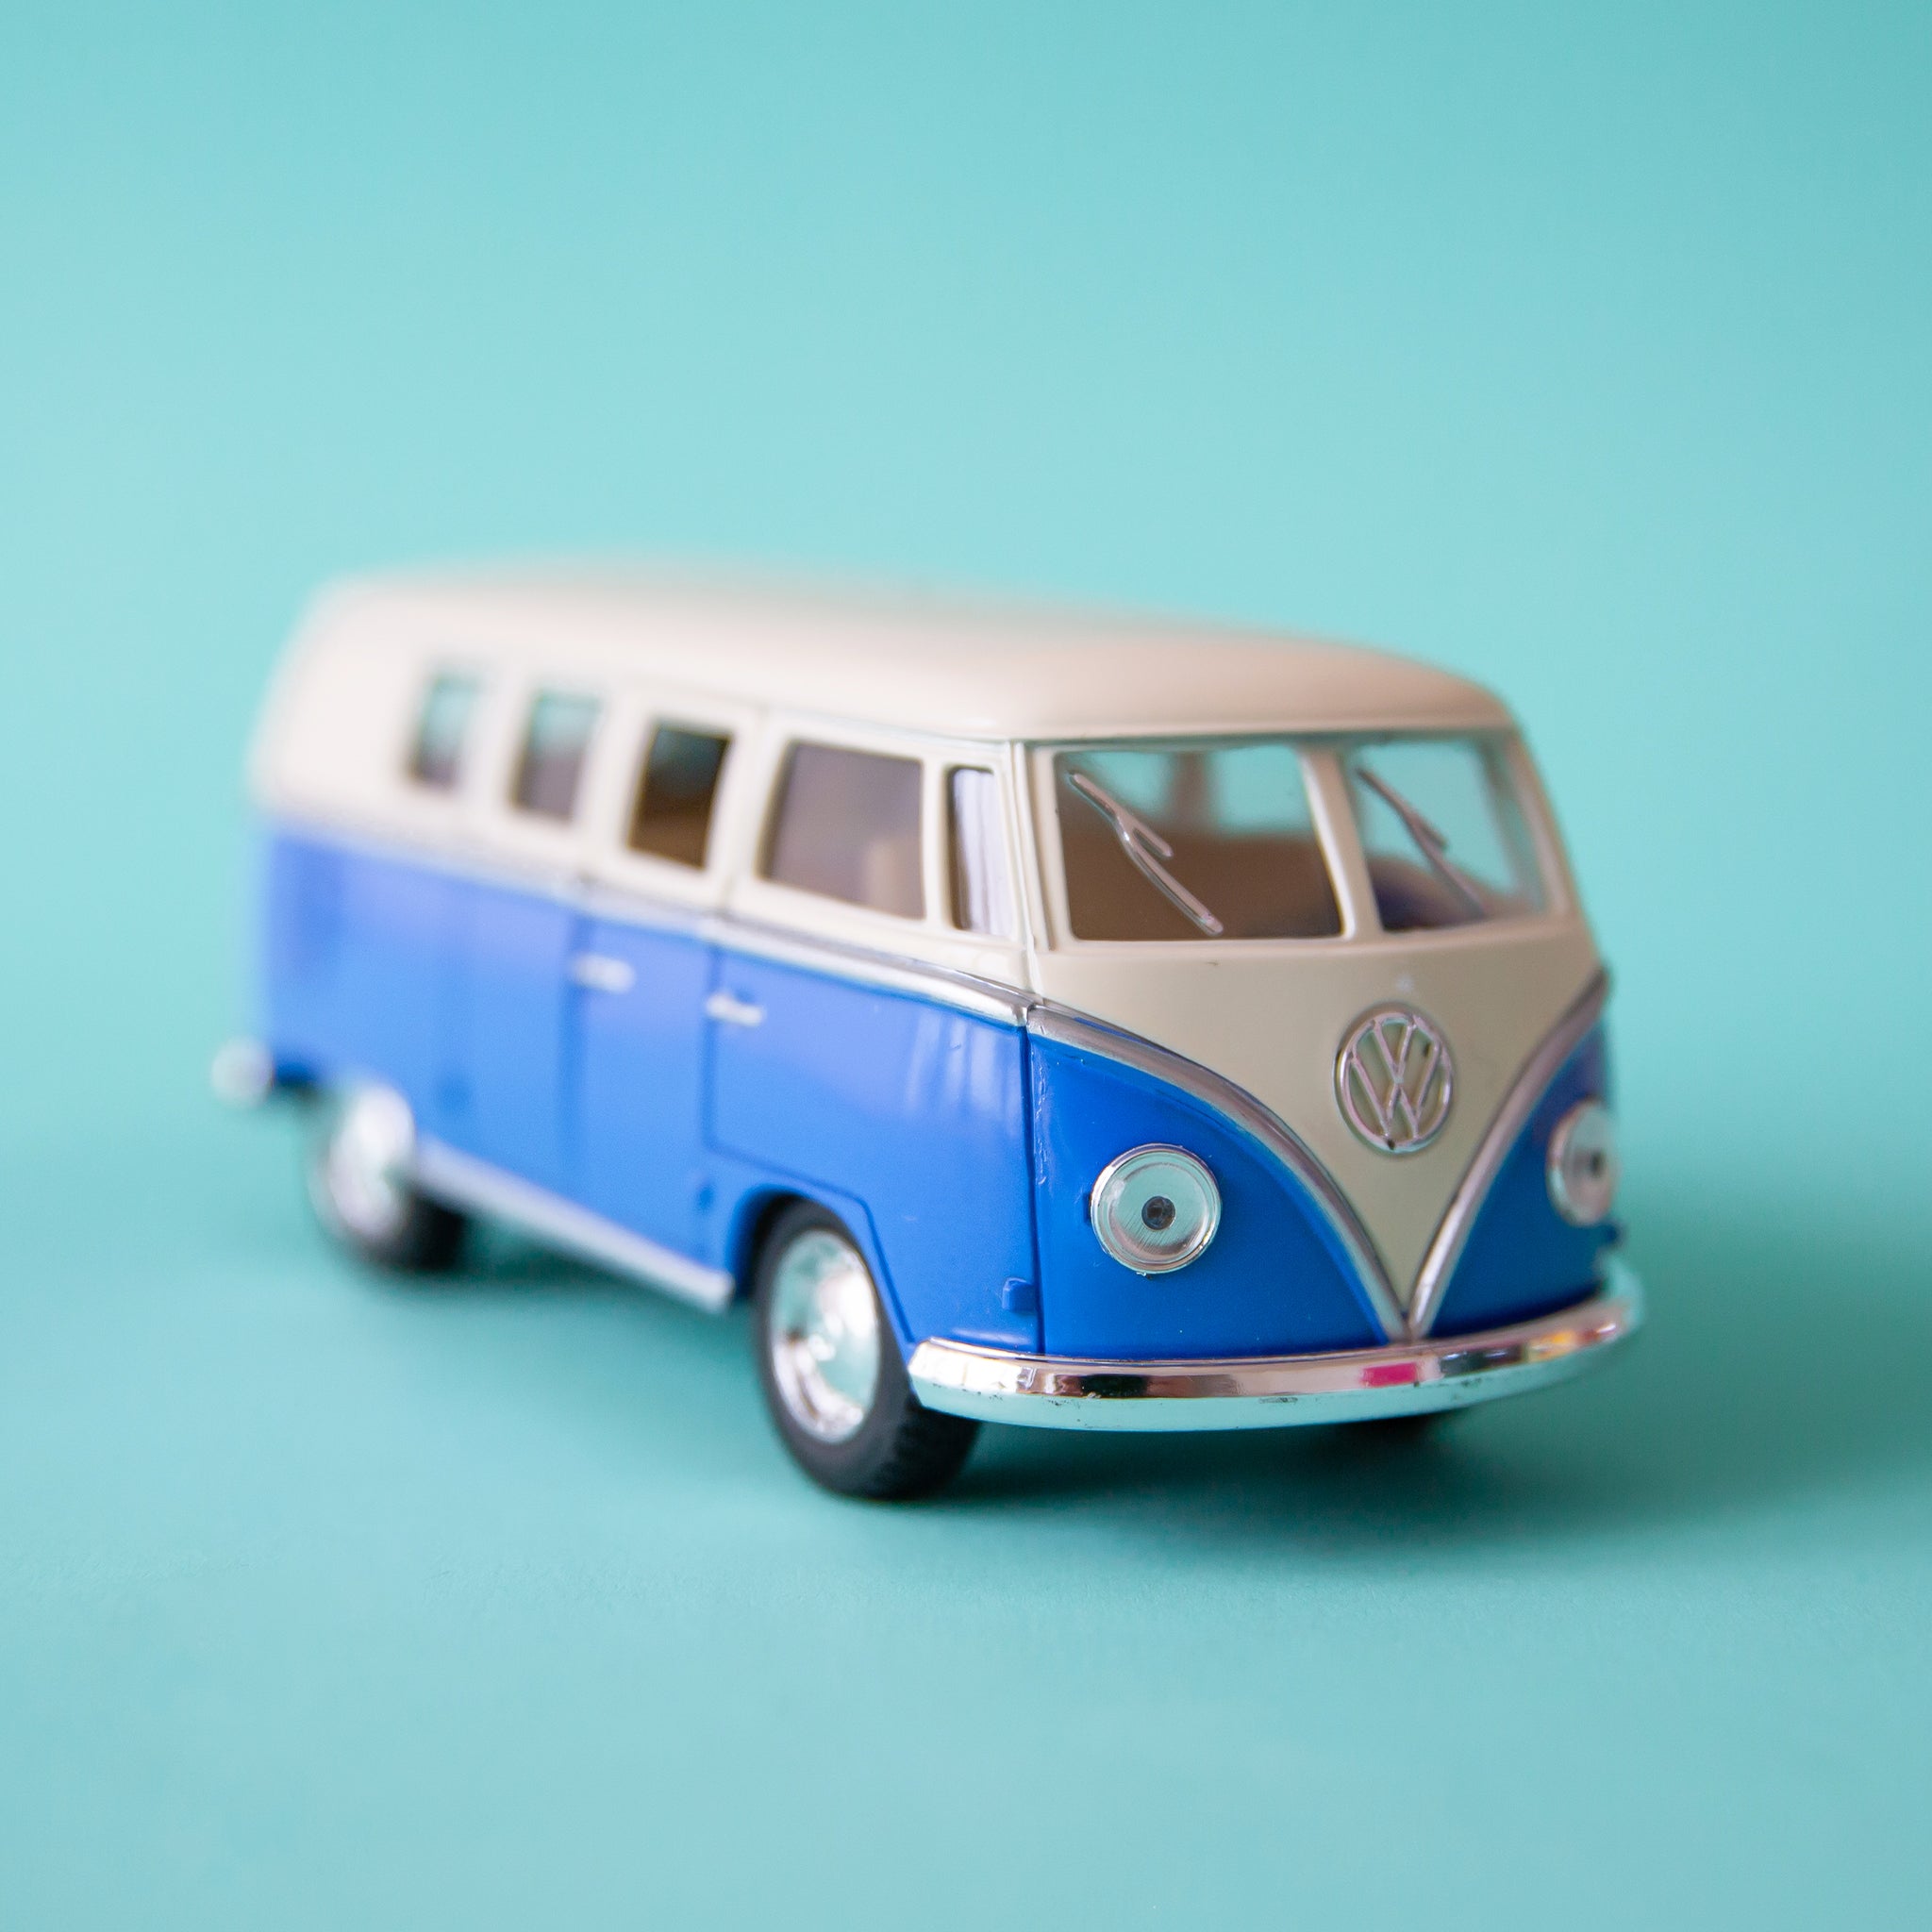 On a blue background is a blue and white VW bus toy. 